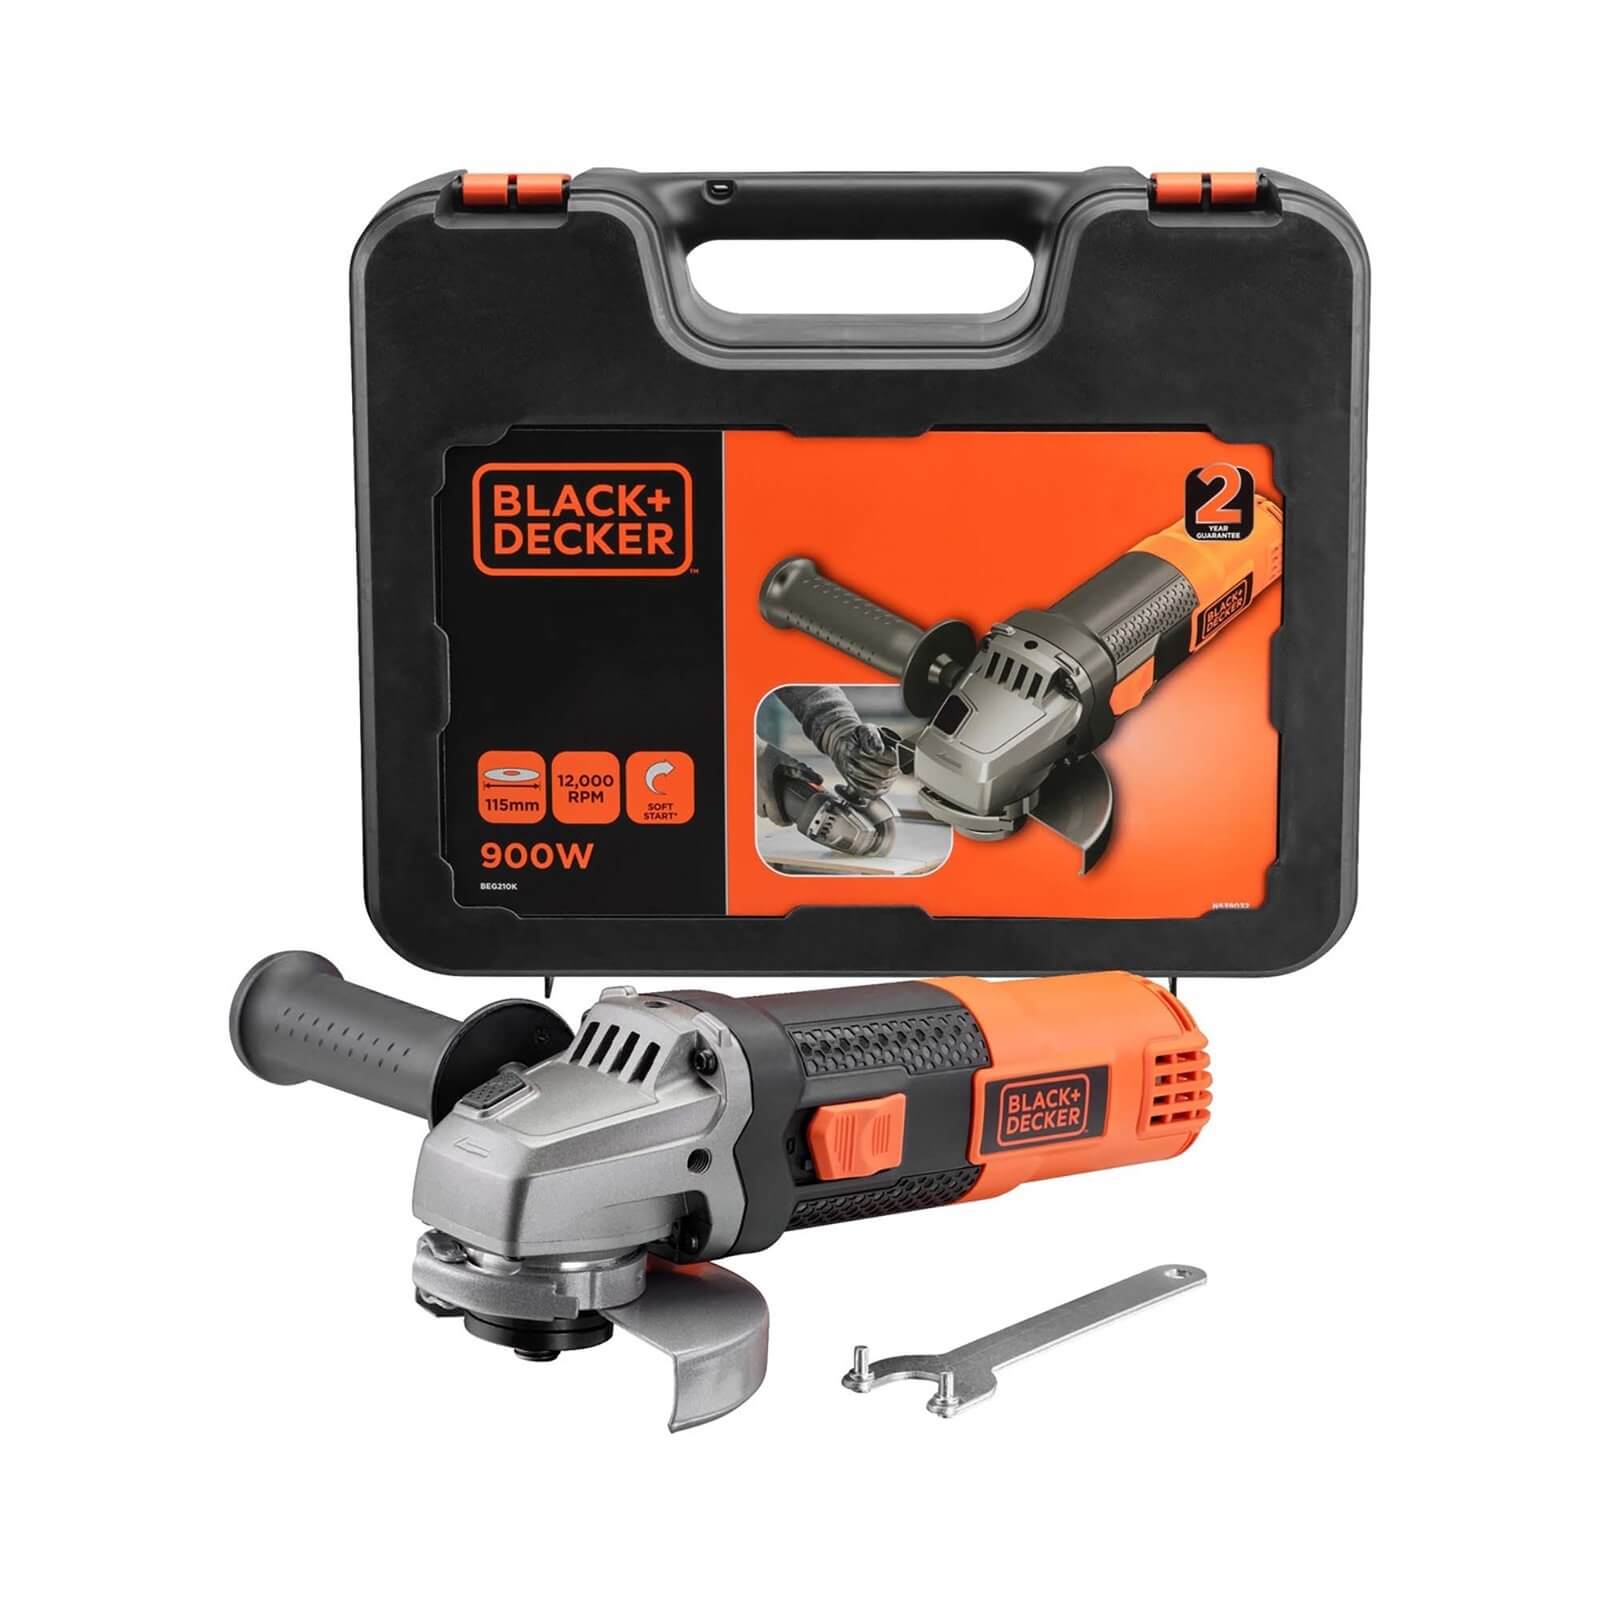 Photo of Black+decker 115mm 900w Corded Angle Grinder With Kit Box -beg210k-gb-